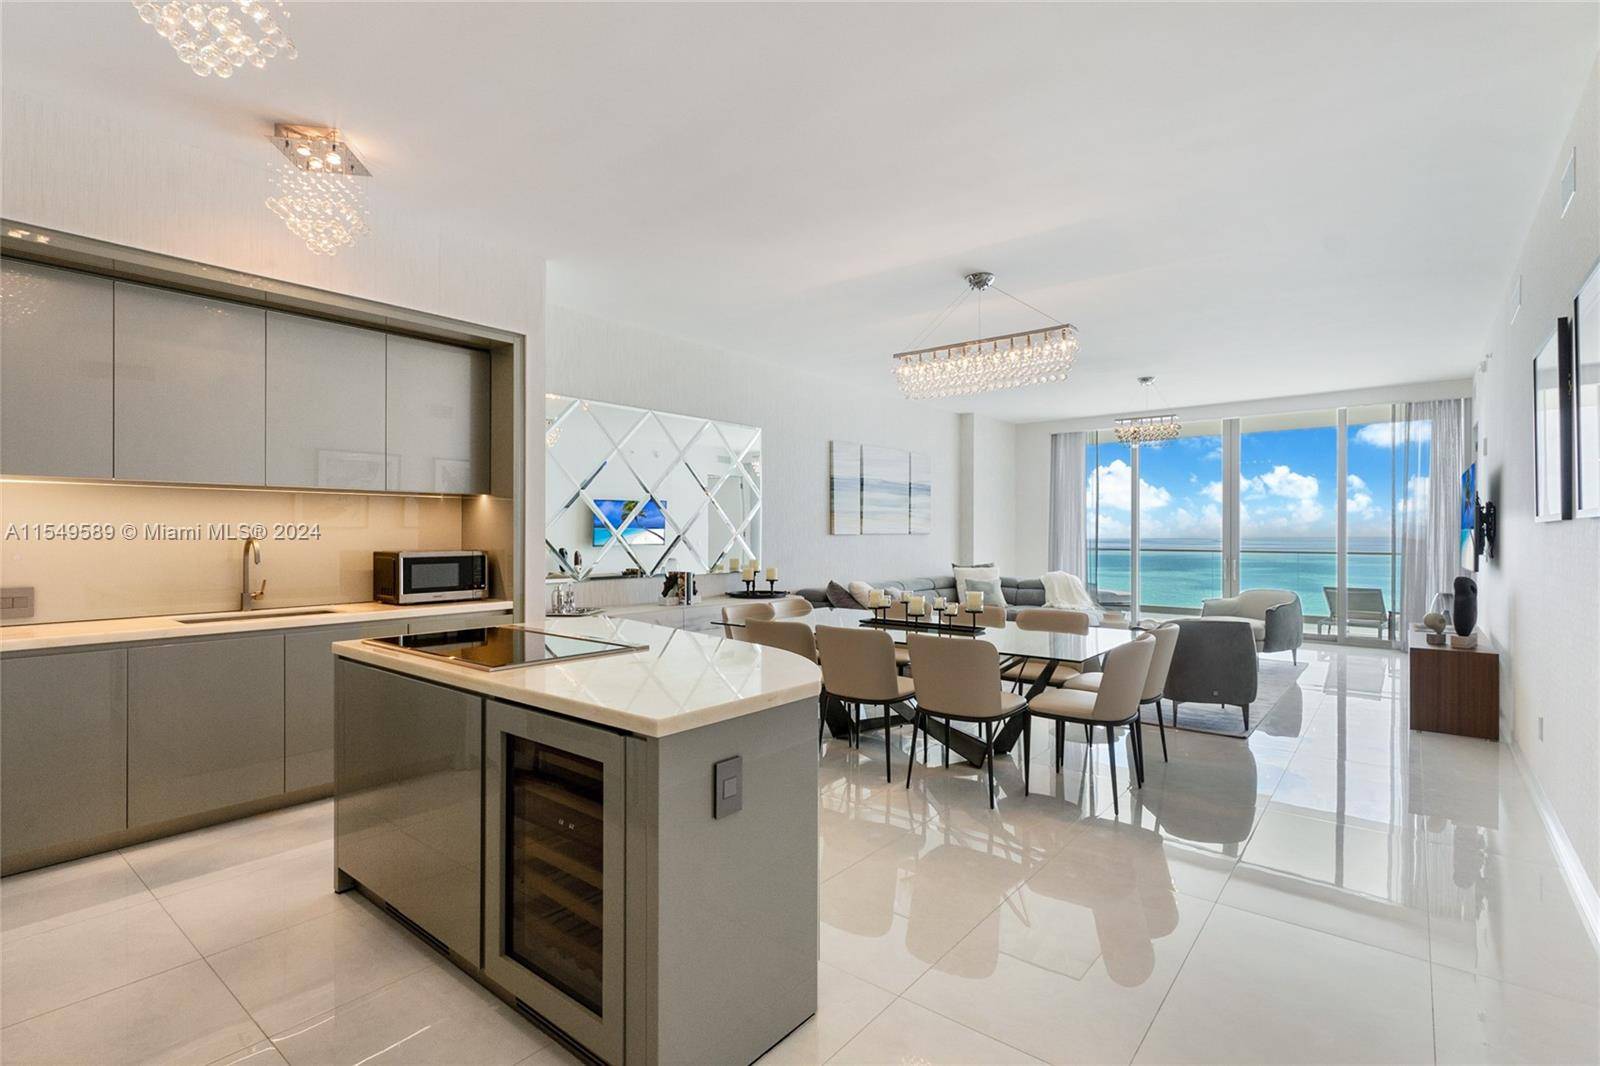 Residences by Armani Casa 2703 offered fully furnished and turnkey for lease.